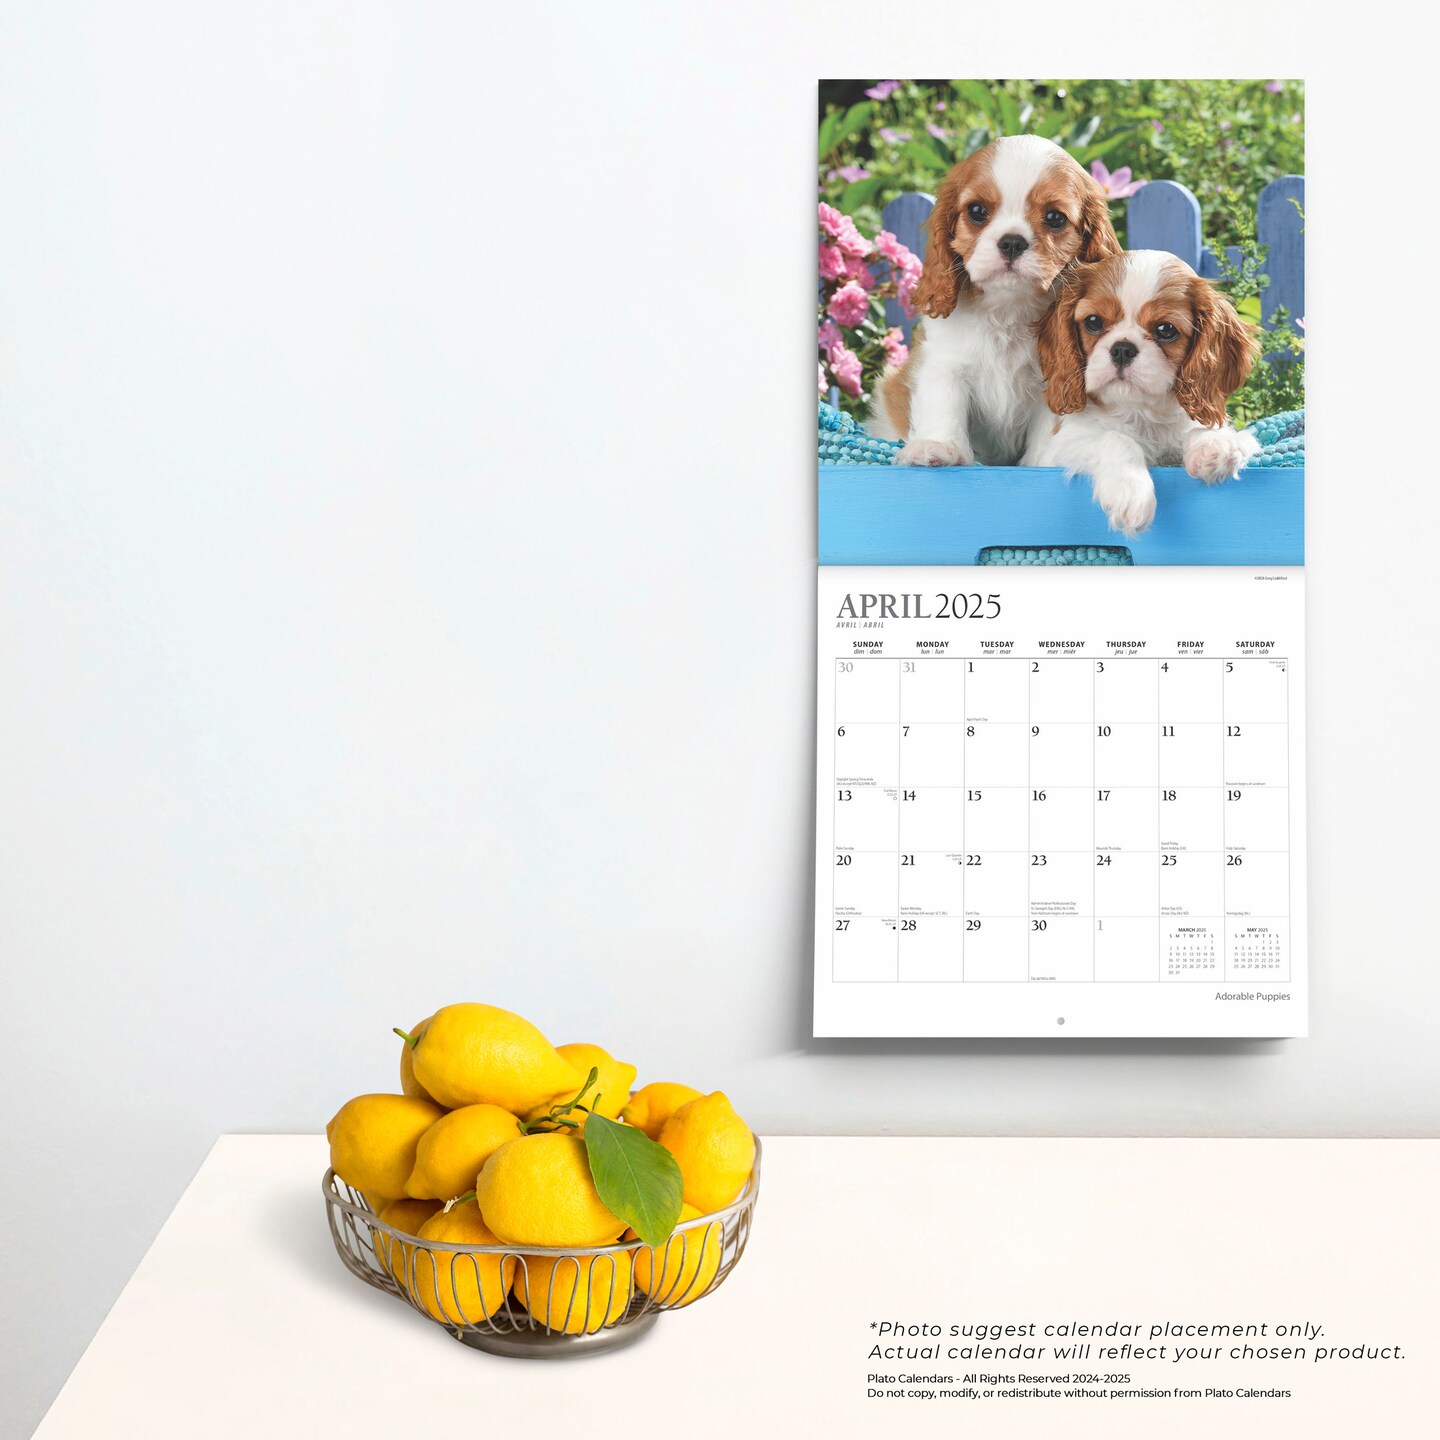 Adorable Puppies | 2025 12 x 24 Inch 18 Months Monthly Square Wall Calendar | July 2024 - December 2025 | Plastic-Free | Plato | Animals Dog Breeds Pets